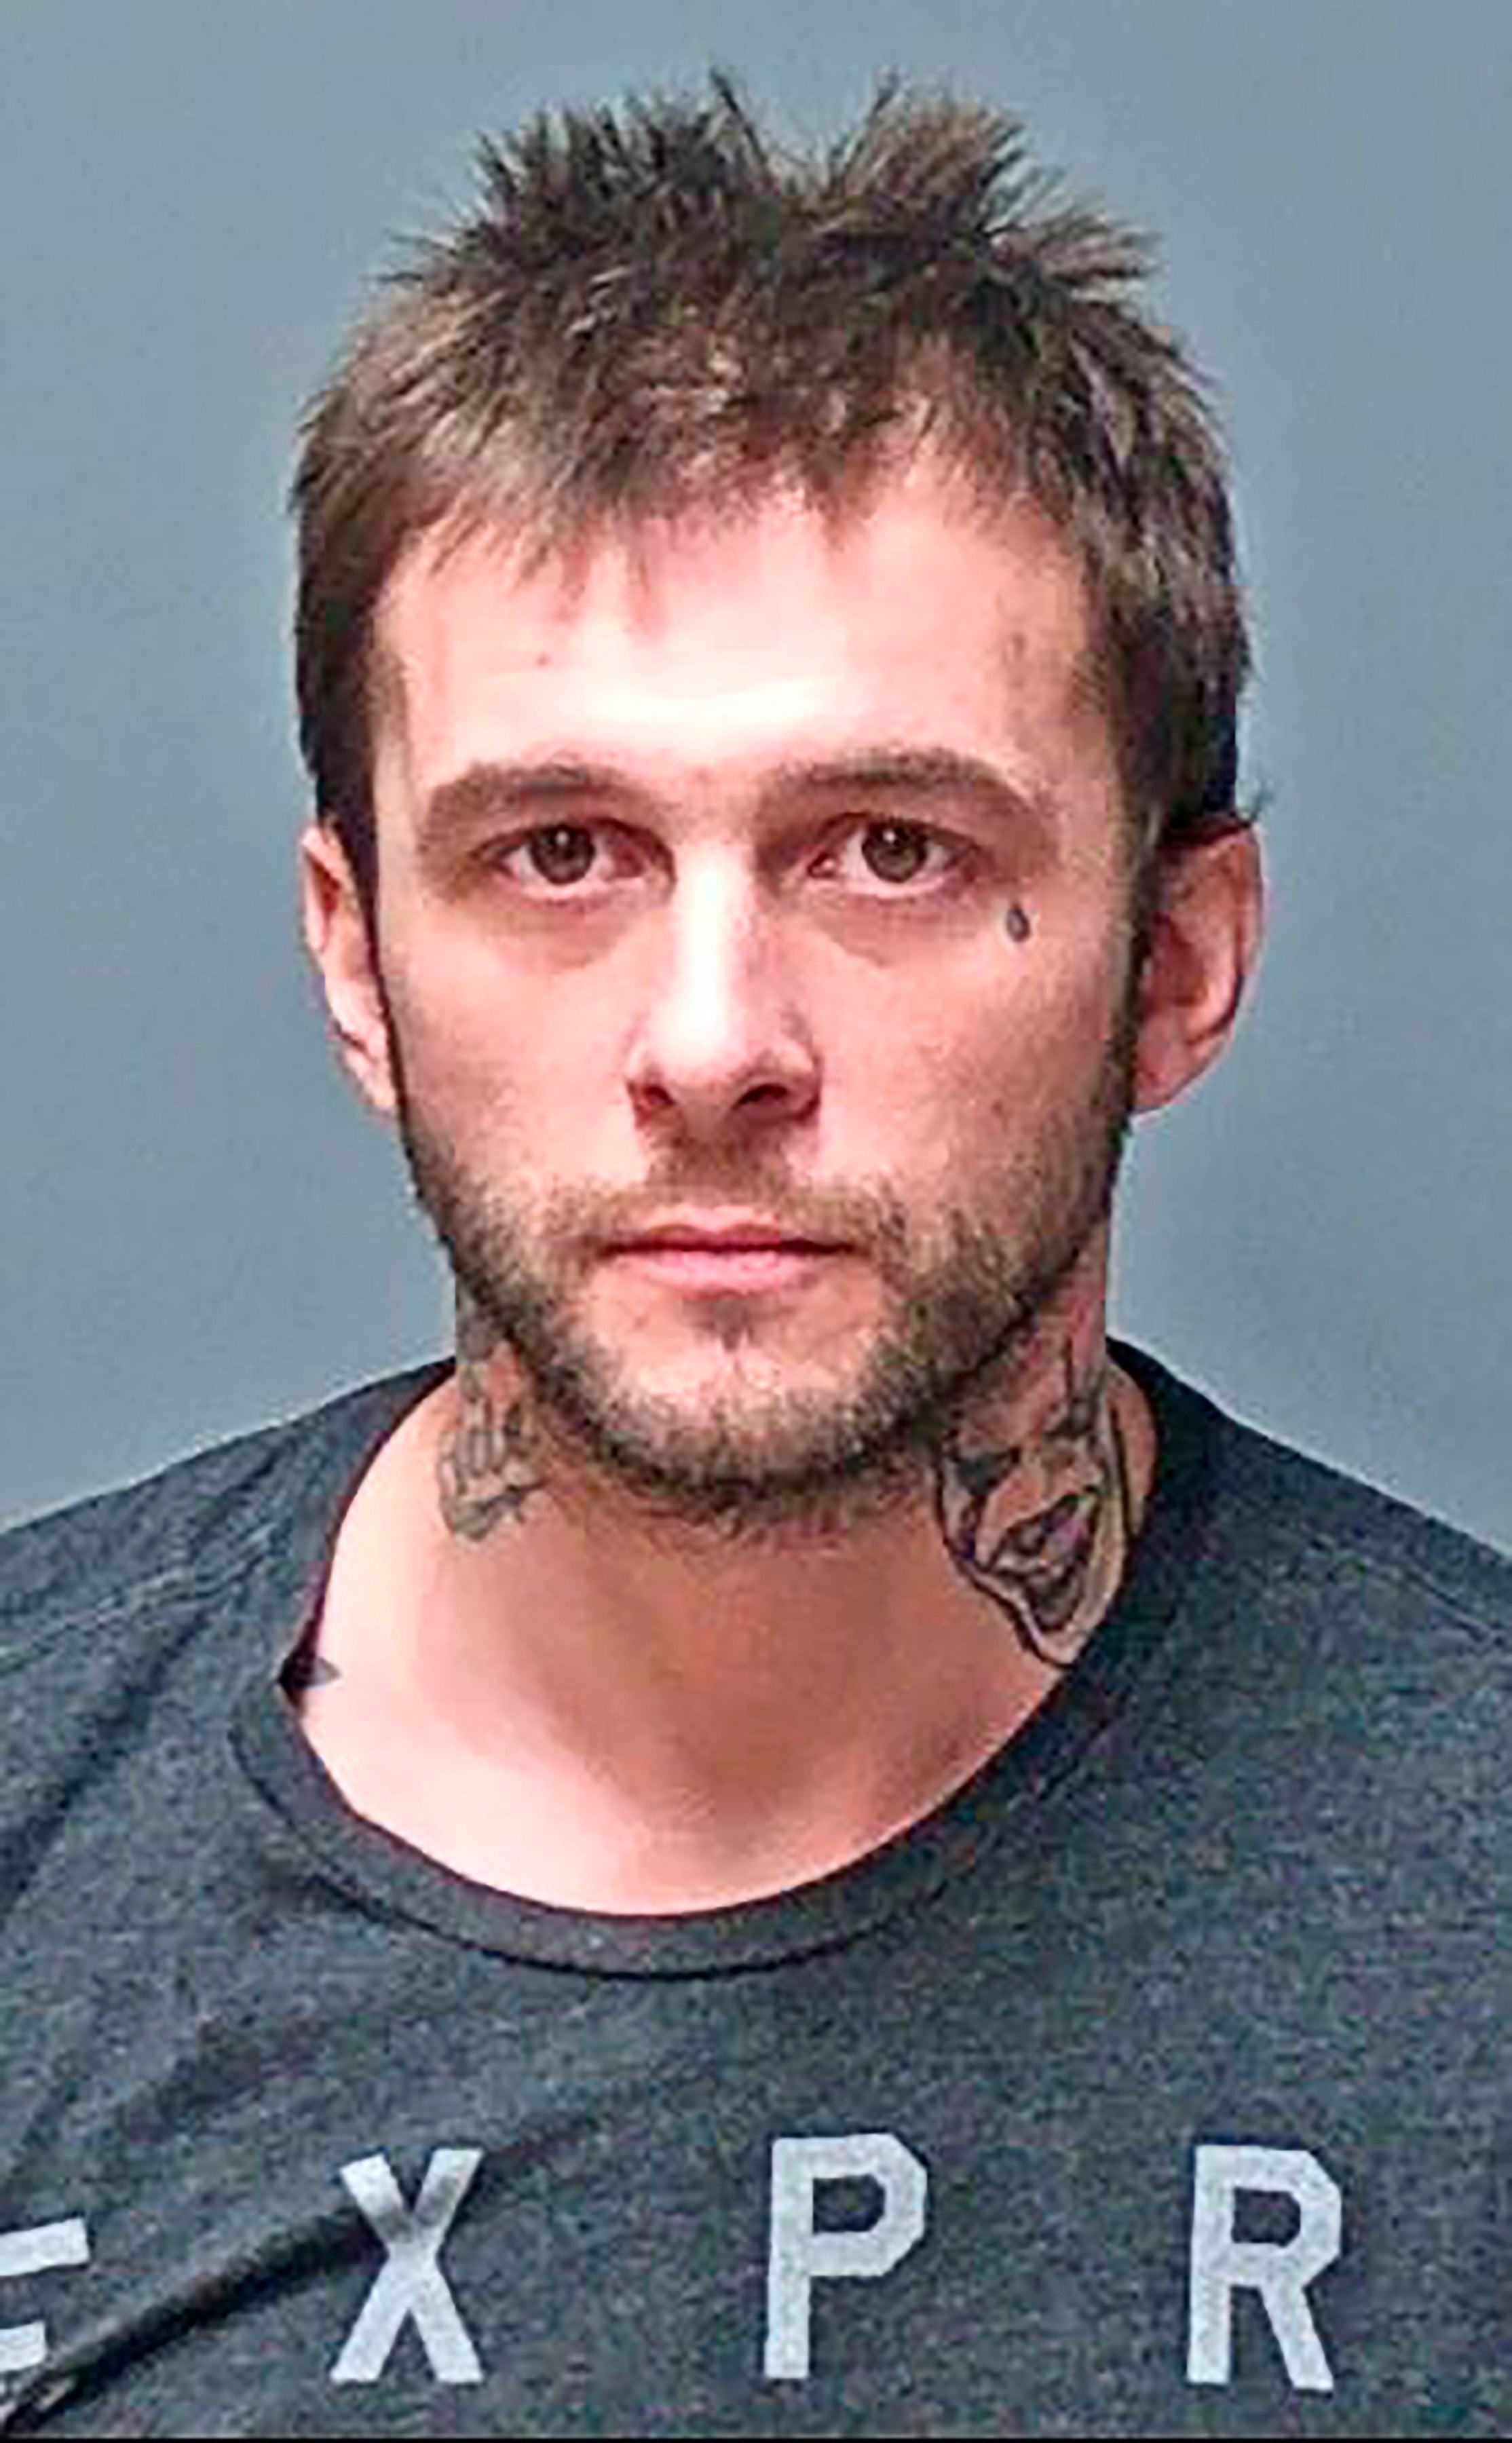 This undated booking photo provided by the Manchester Police Department shows Adam Montgomery, of Manchester, NH